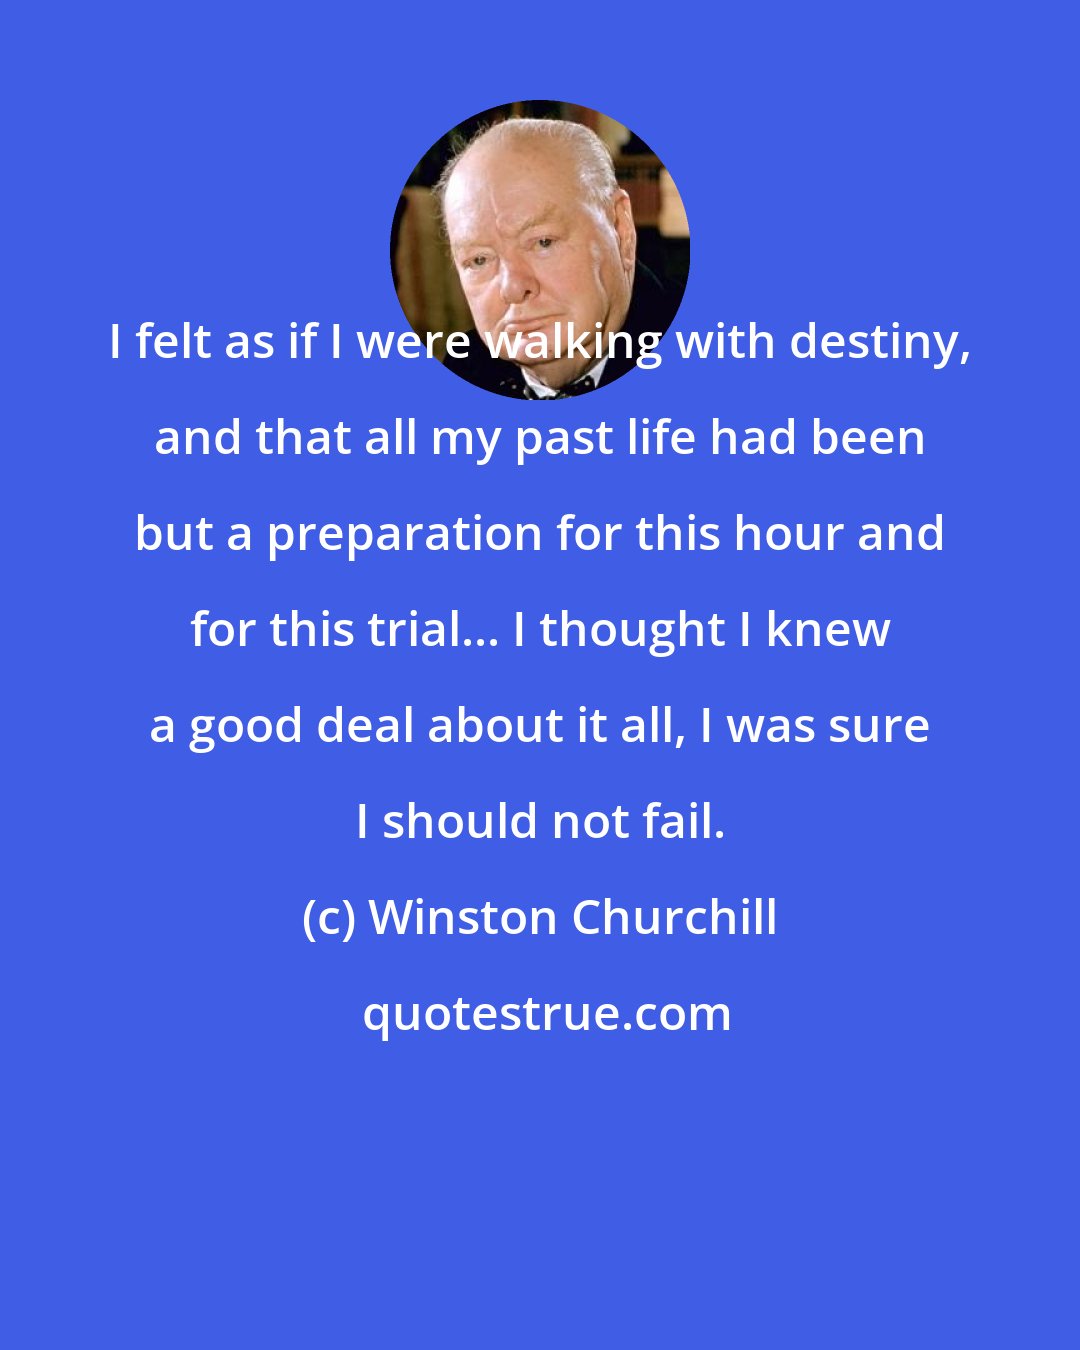 Winston Churchill: I felt as if I were walking with destiny, and that all my past life had been but a preparation for this hour and for this trial... I thought I knew a good deal about it all, I was sure I should not fail.